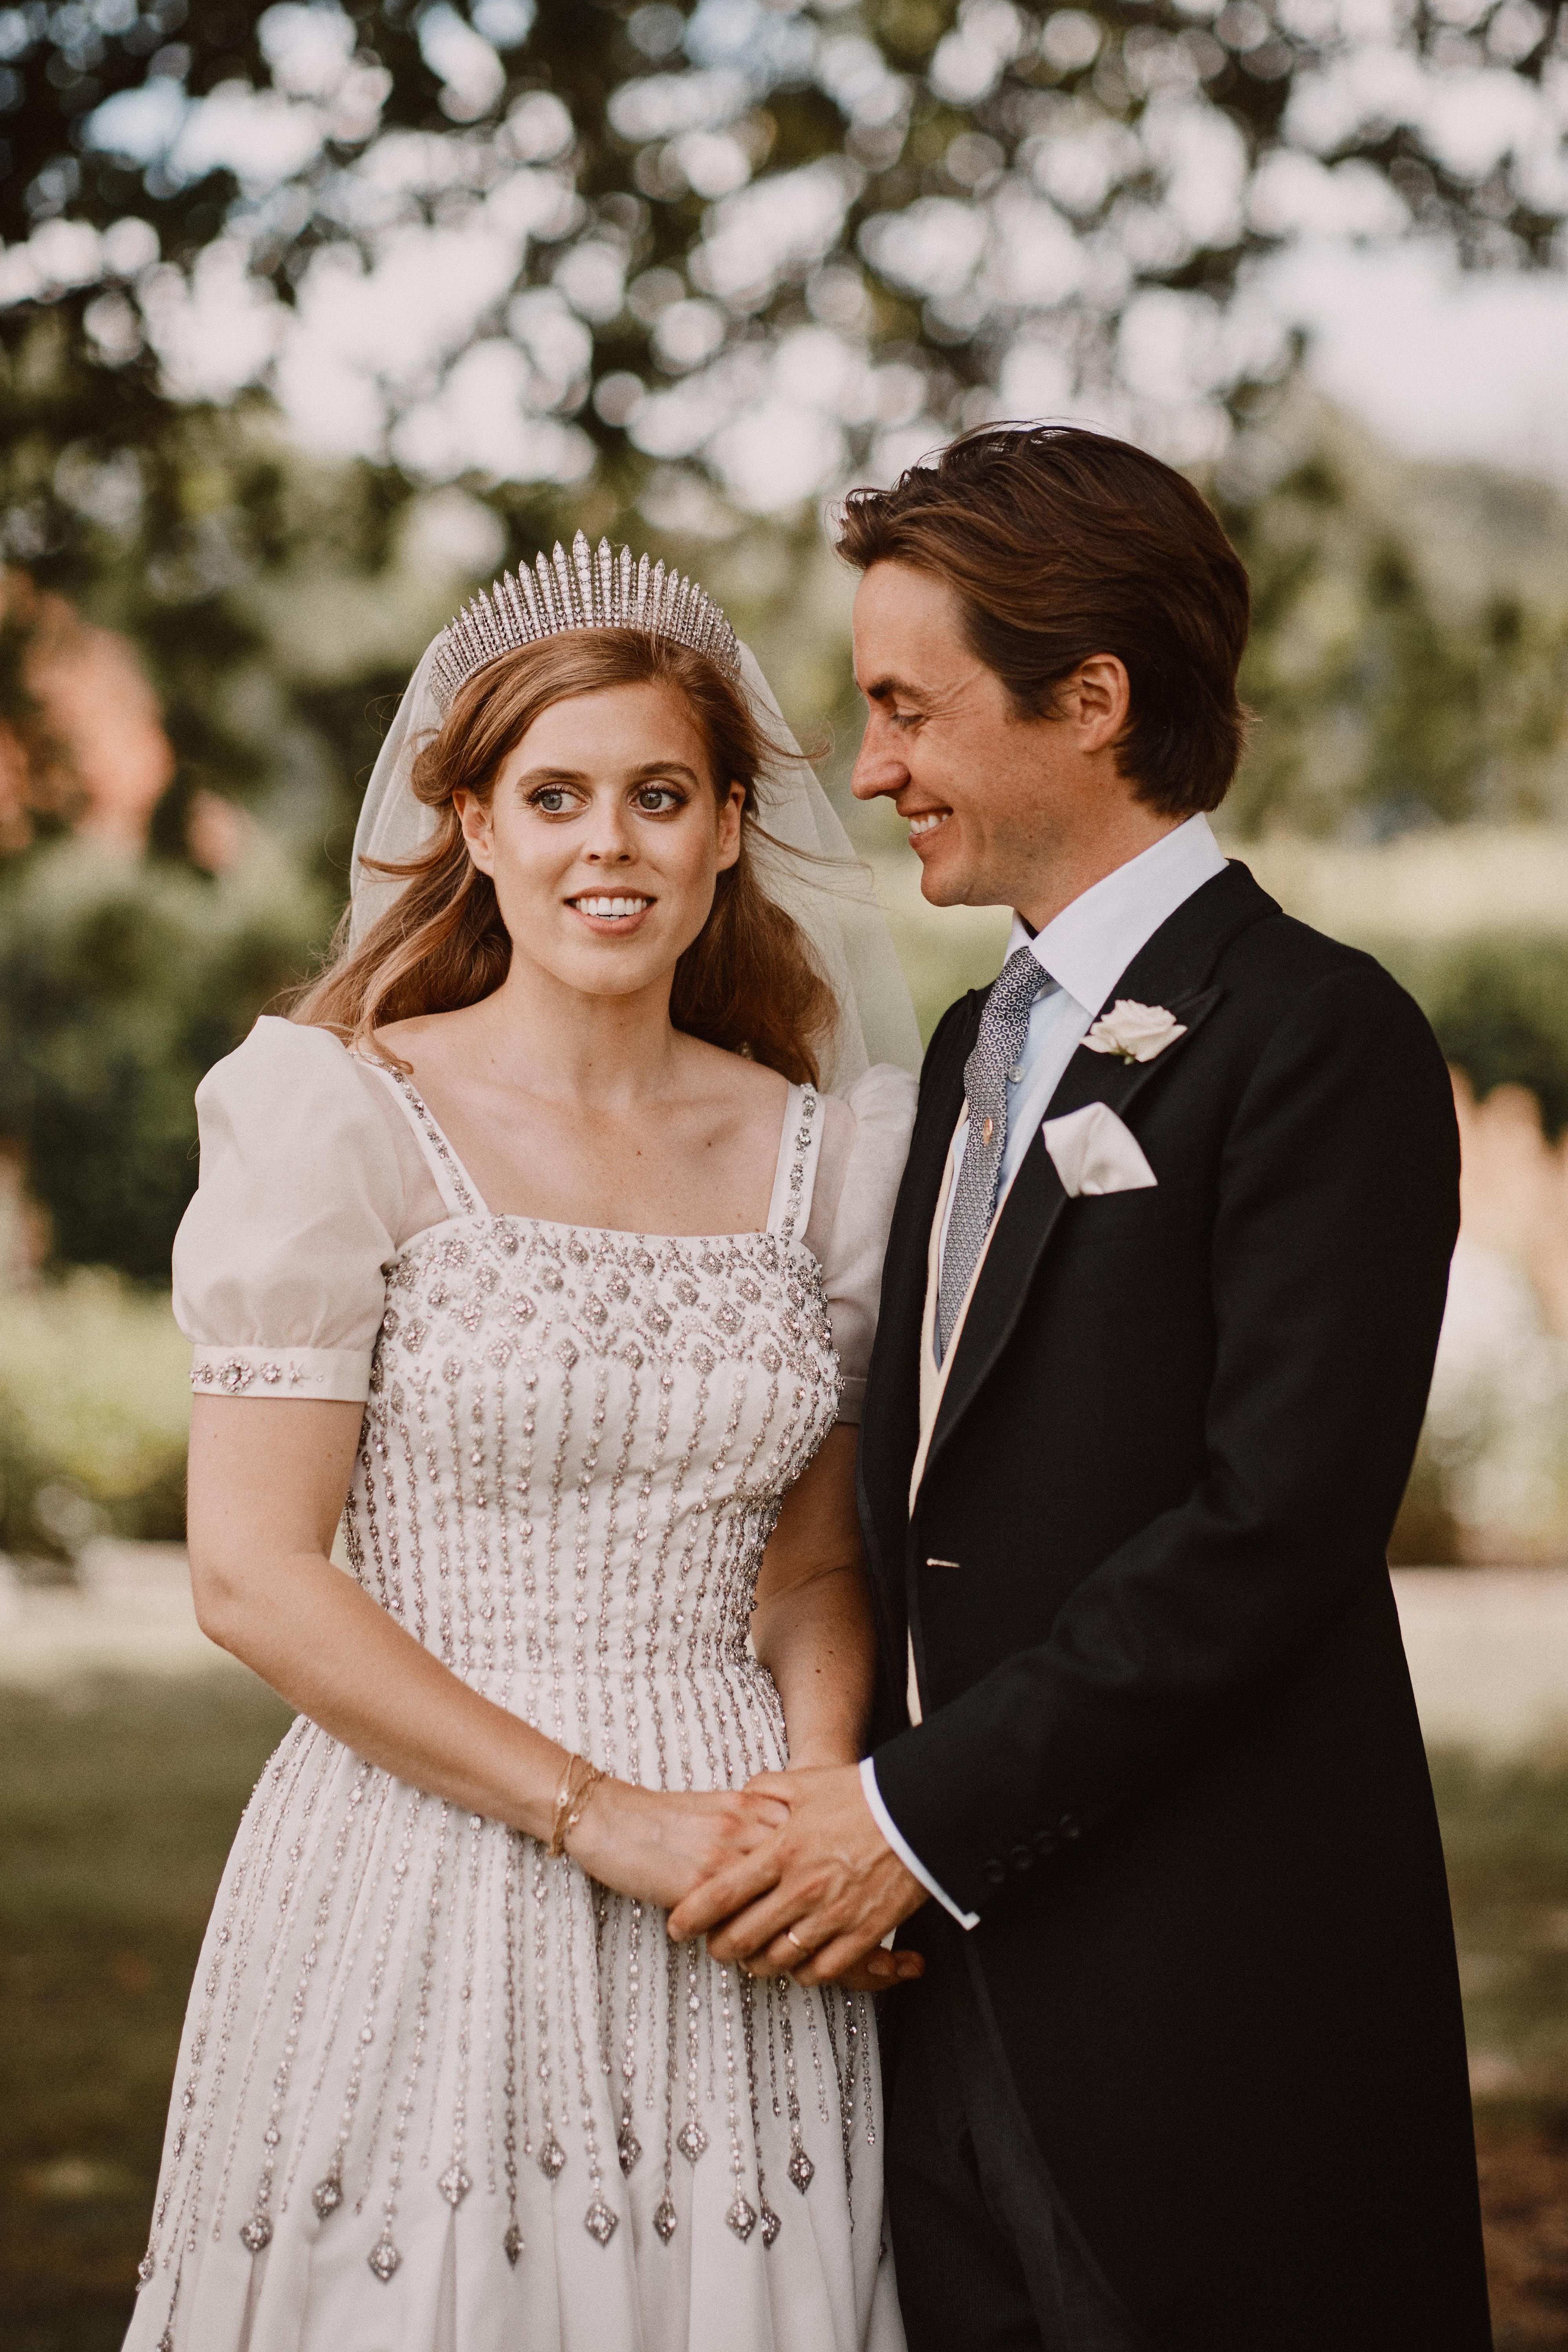 Princess Beatrice and Edoardo Mapelli Mozzi  after their wedding in the grounds of Royal Lodge on July 18, 2020. | Getty Images